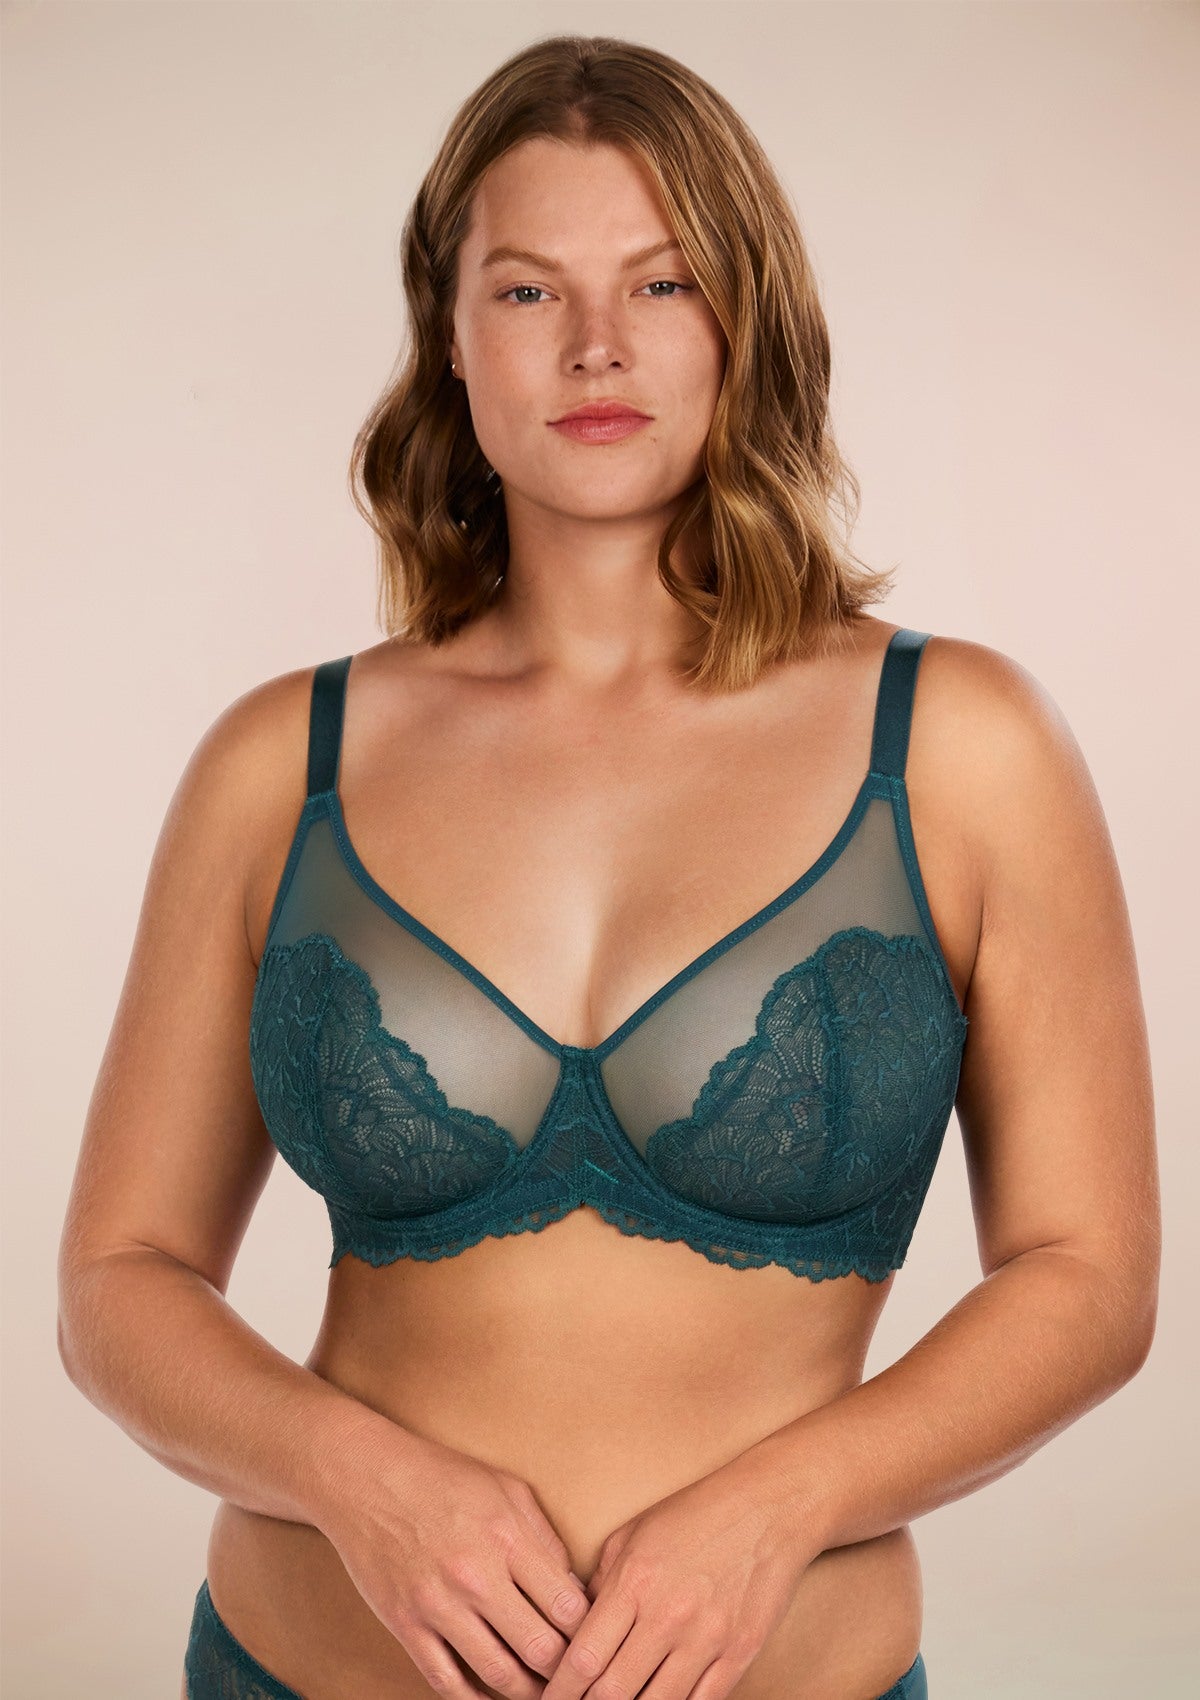 HSIA Blossom Full Figure See-Through Lace Bra For Side And Back Fat - Biscay Blue / 34 / DDD/F